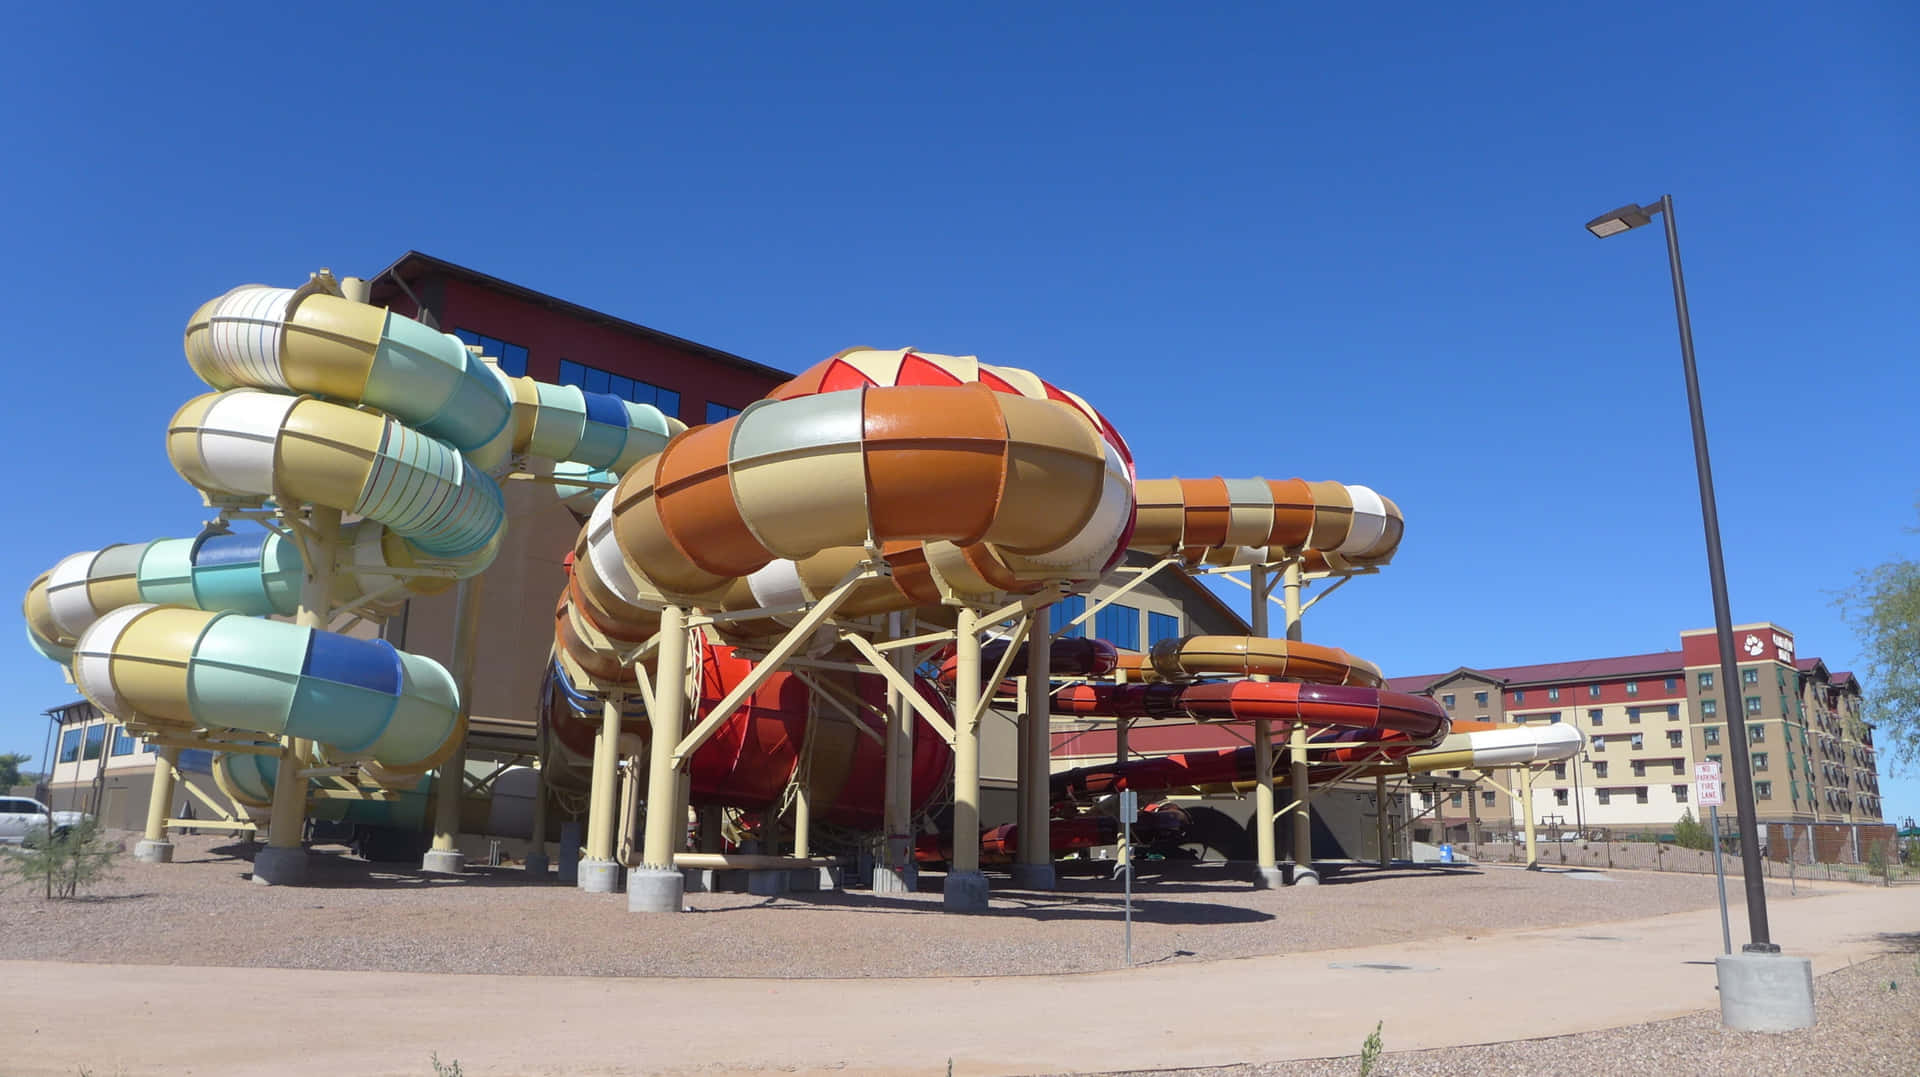 A Large Building With A Water Slide